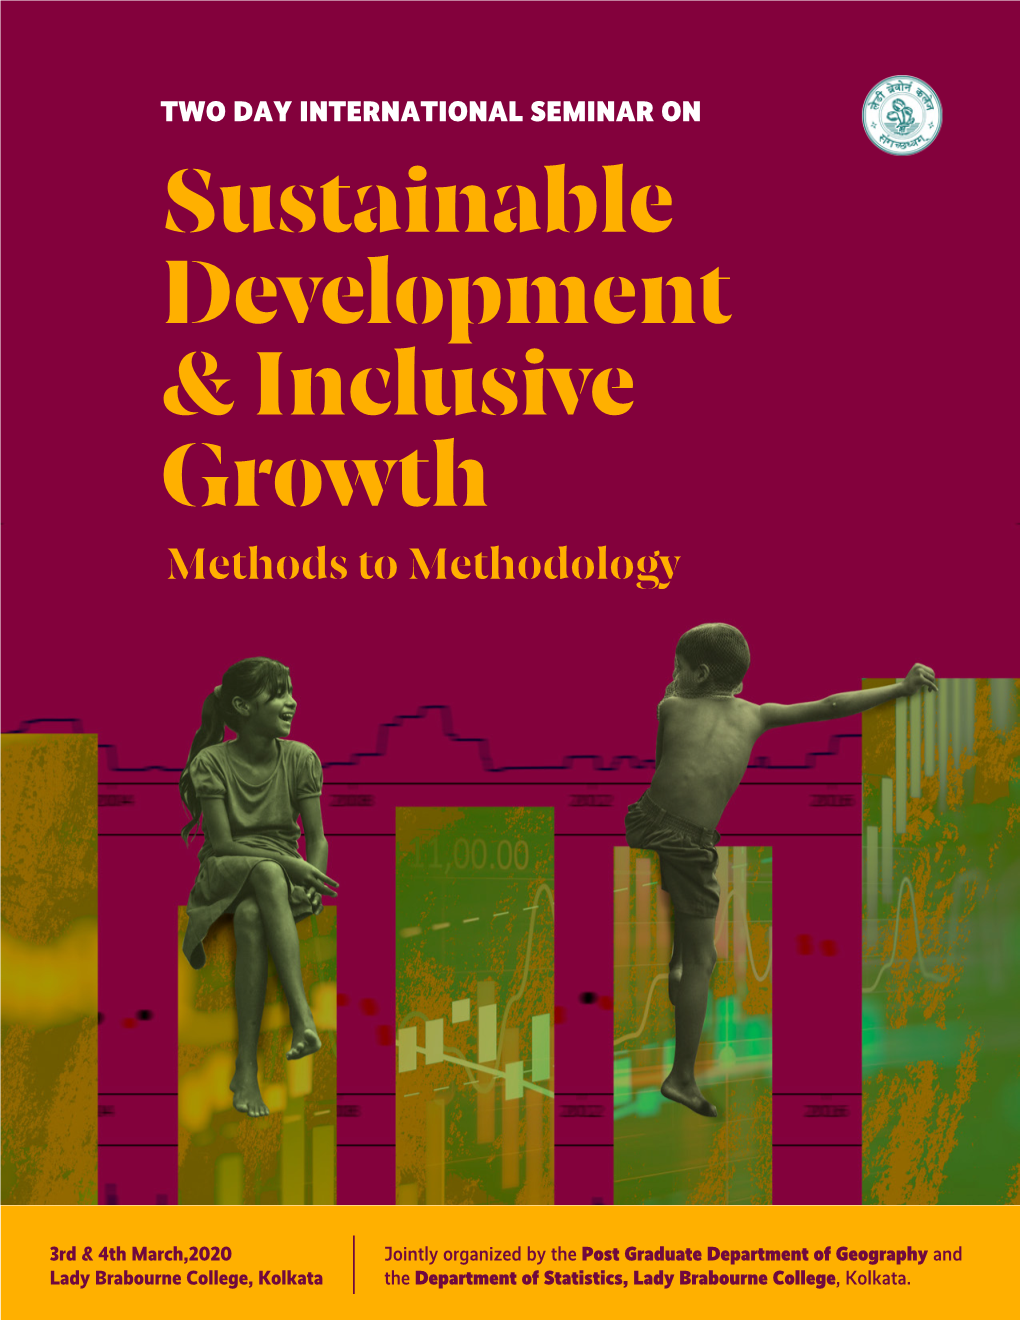 Sustainable Development & Inclusive Growth